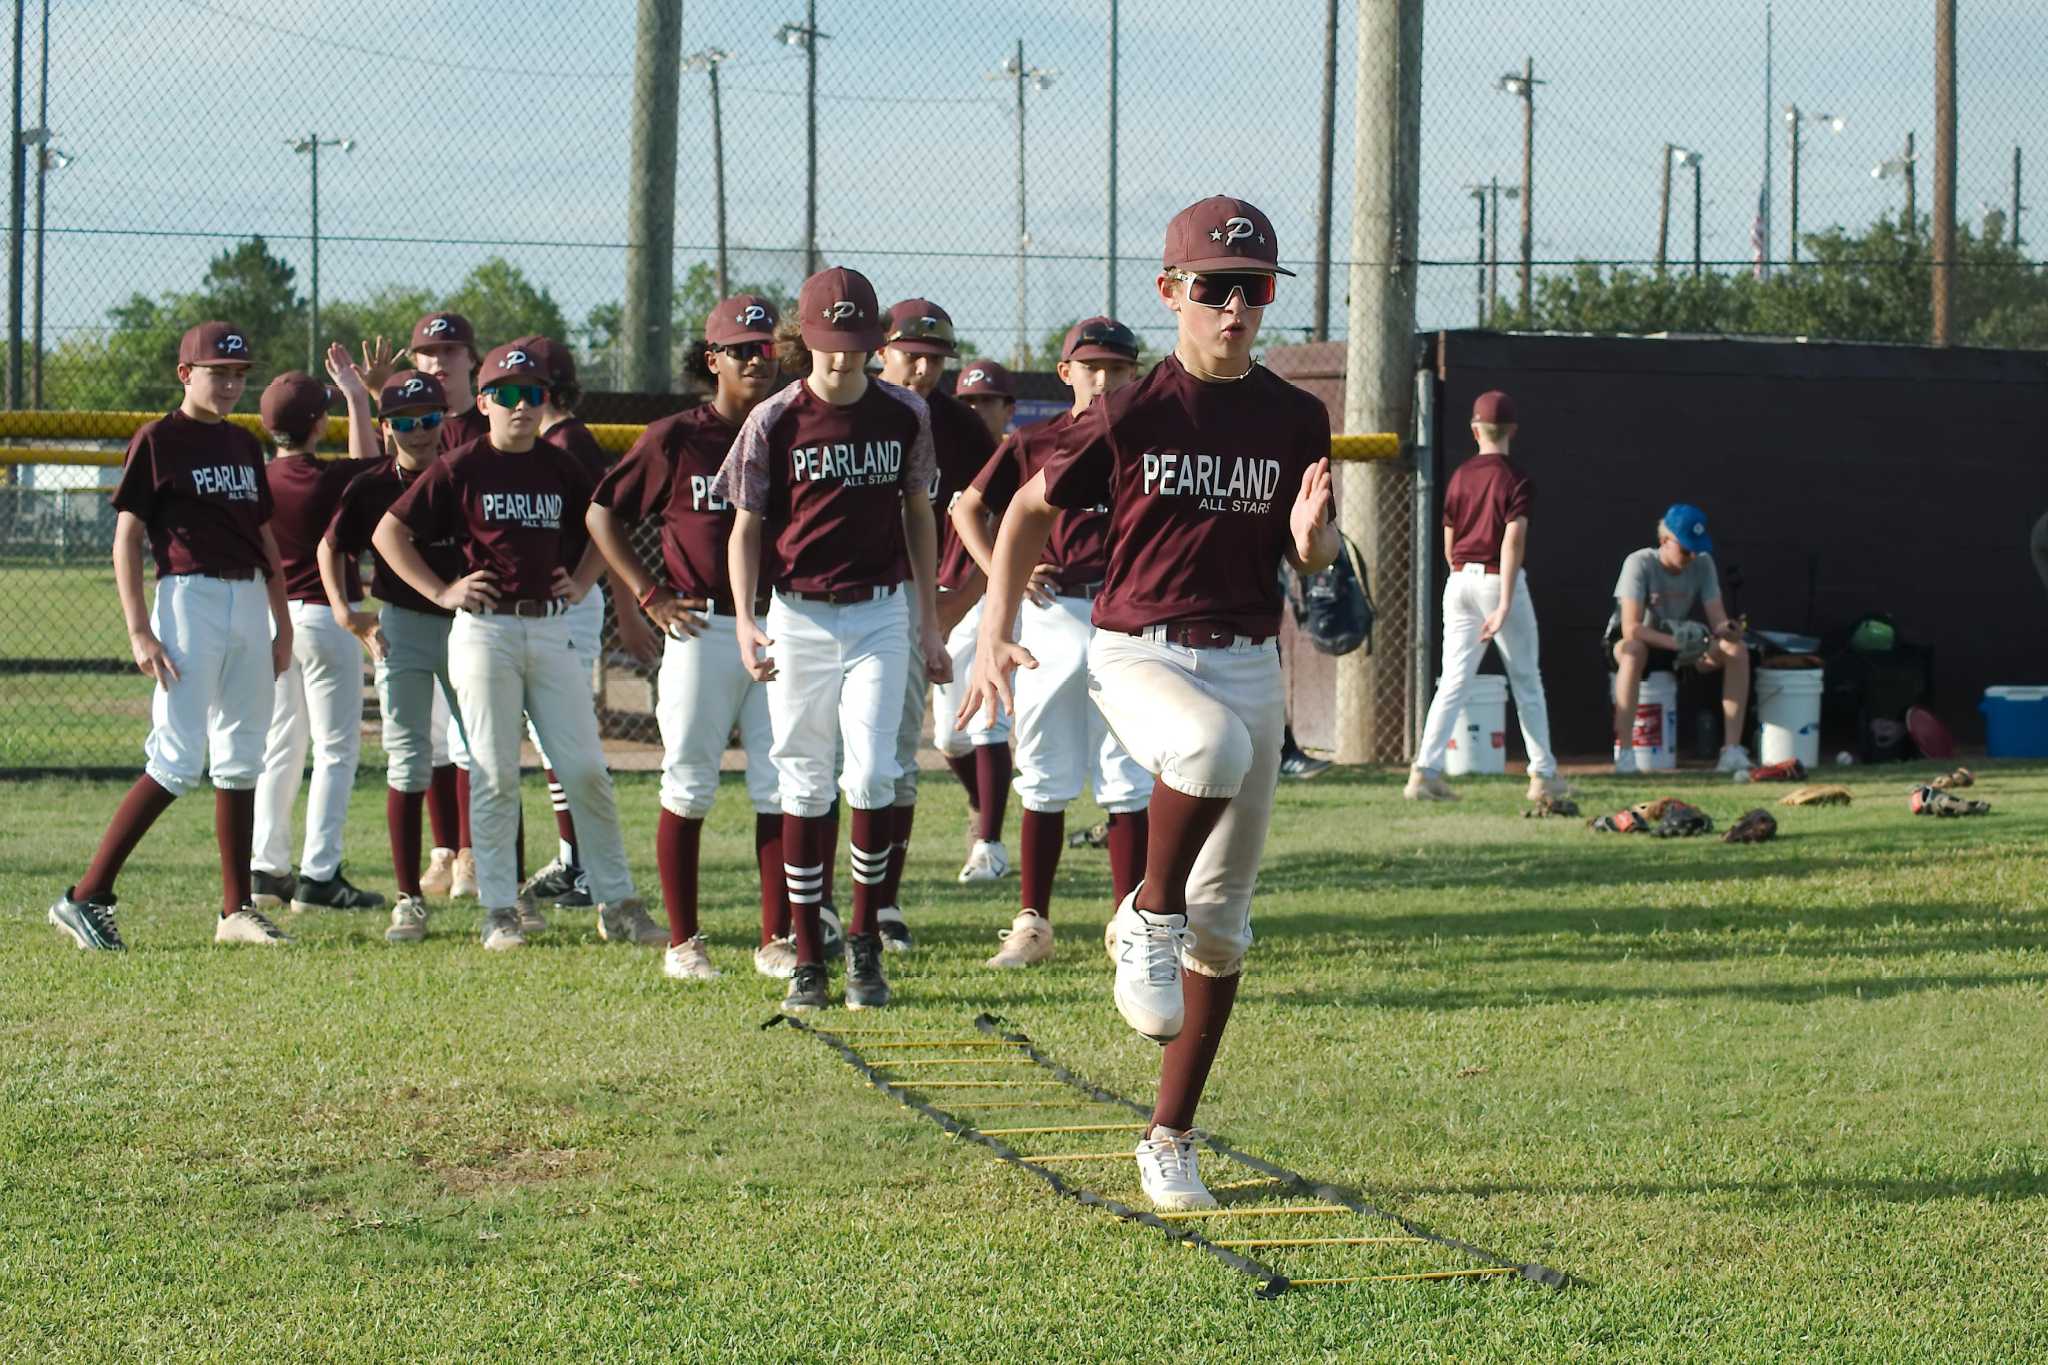 Little League: Pearland looks to remain hot at state tourney